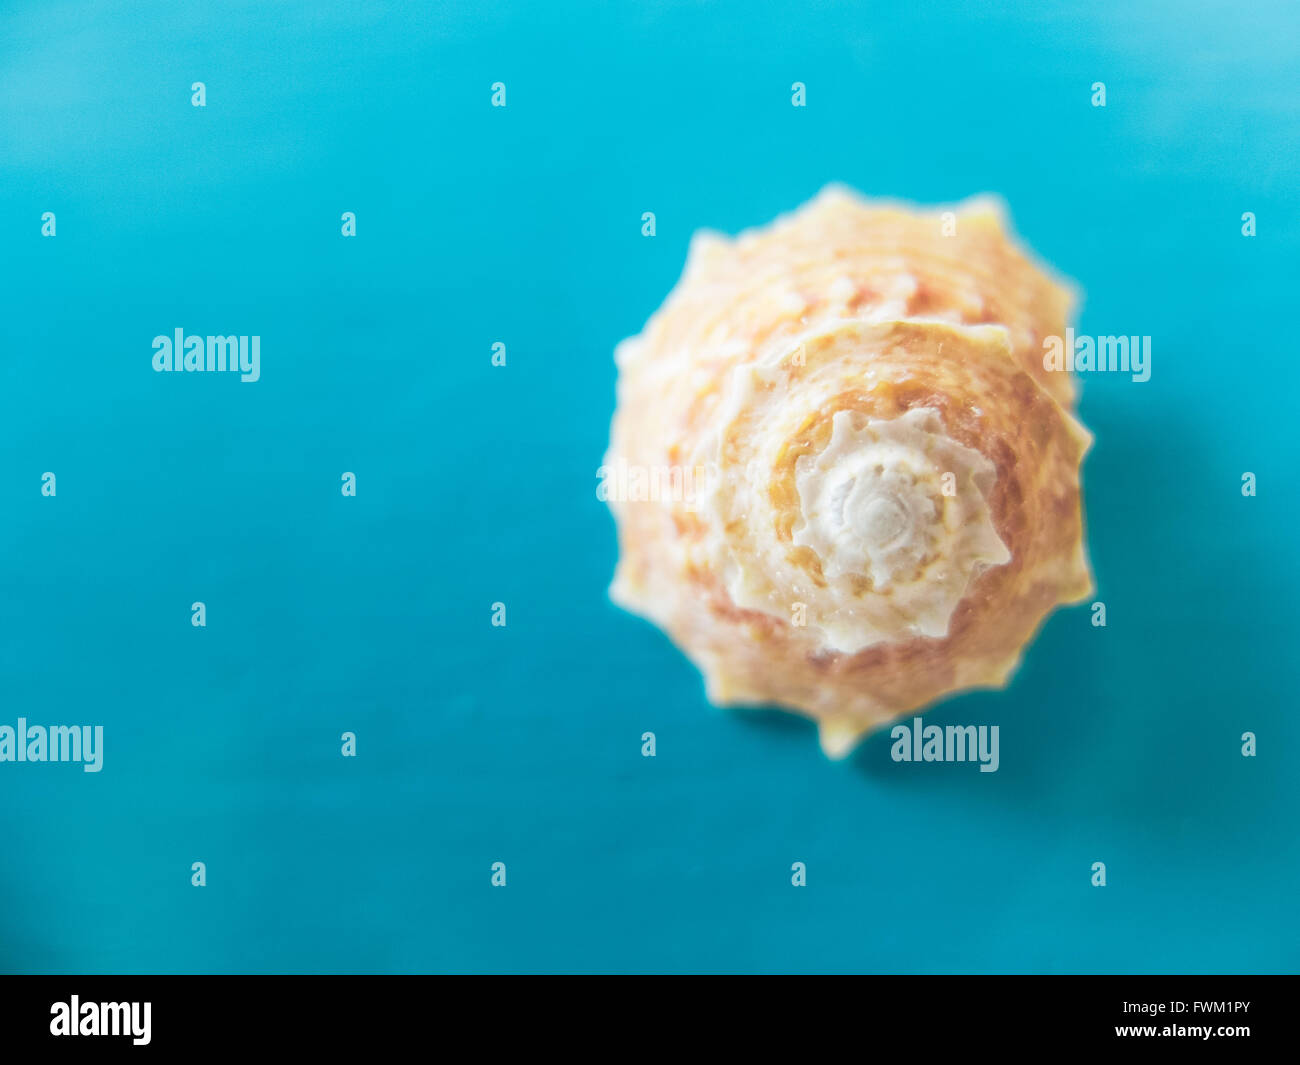 Close-Up Of Seashell On Blue Table Stock Photo